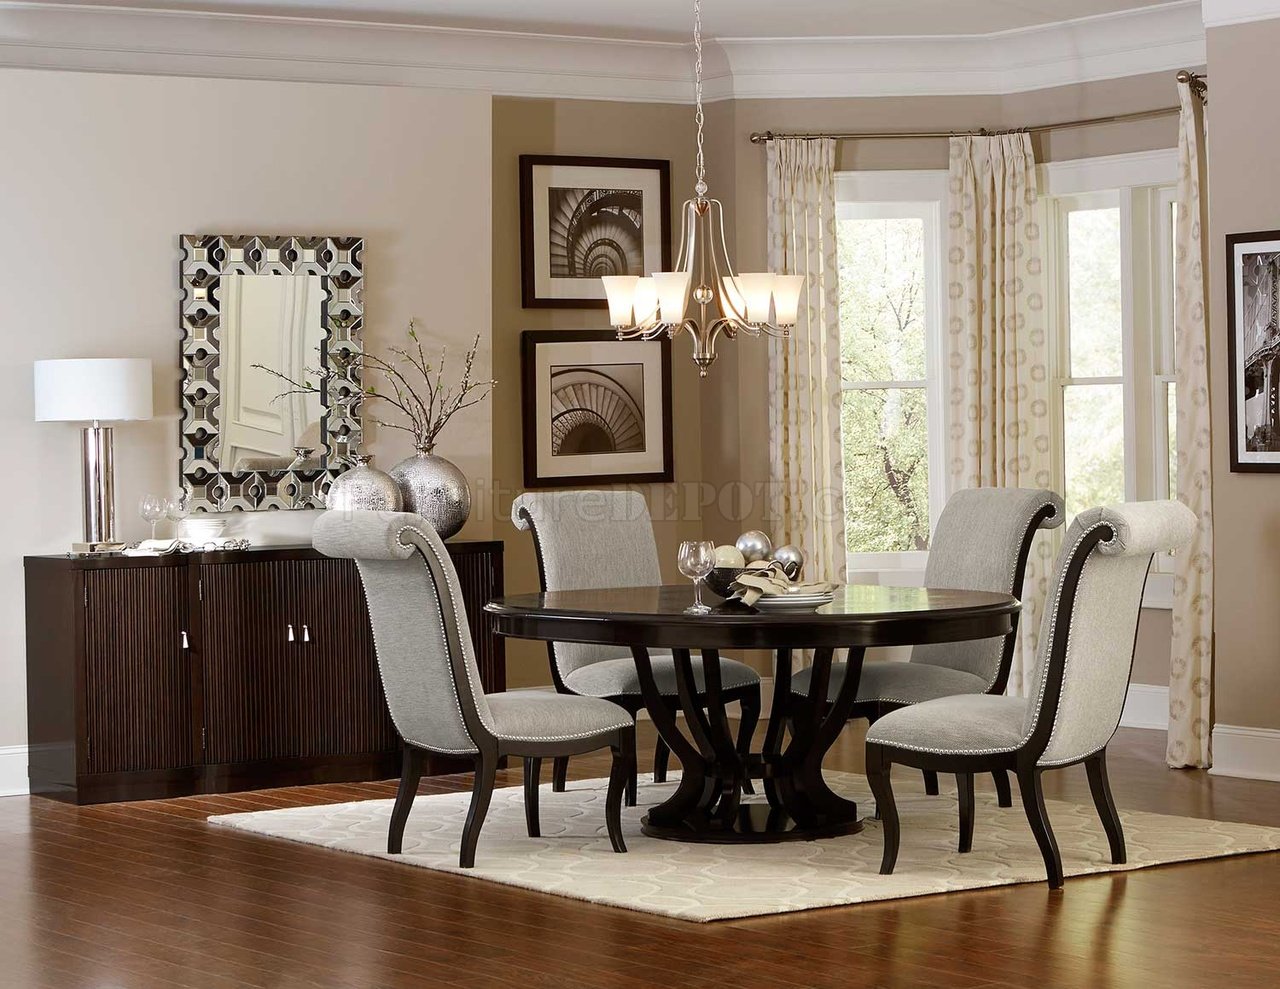 Rent-A-Center Dining Room Tables